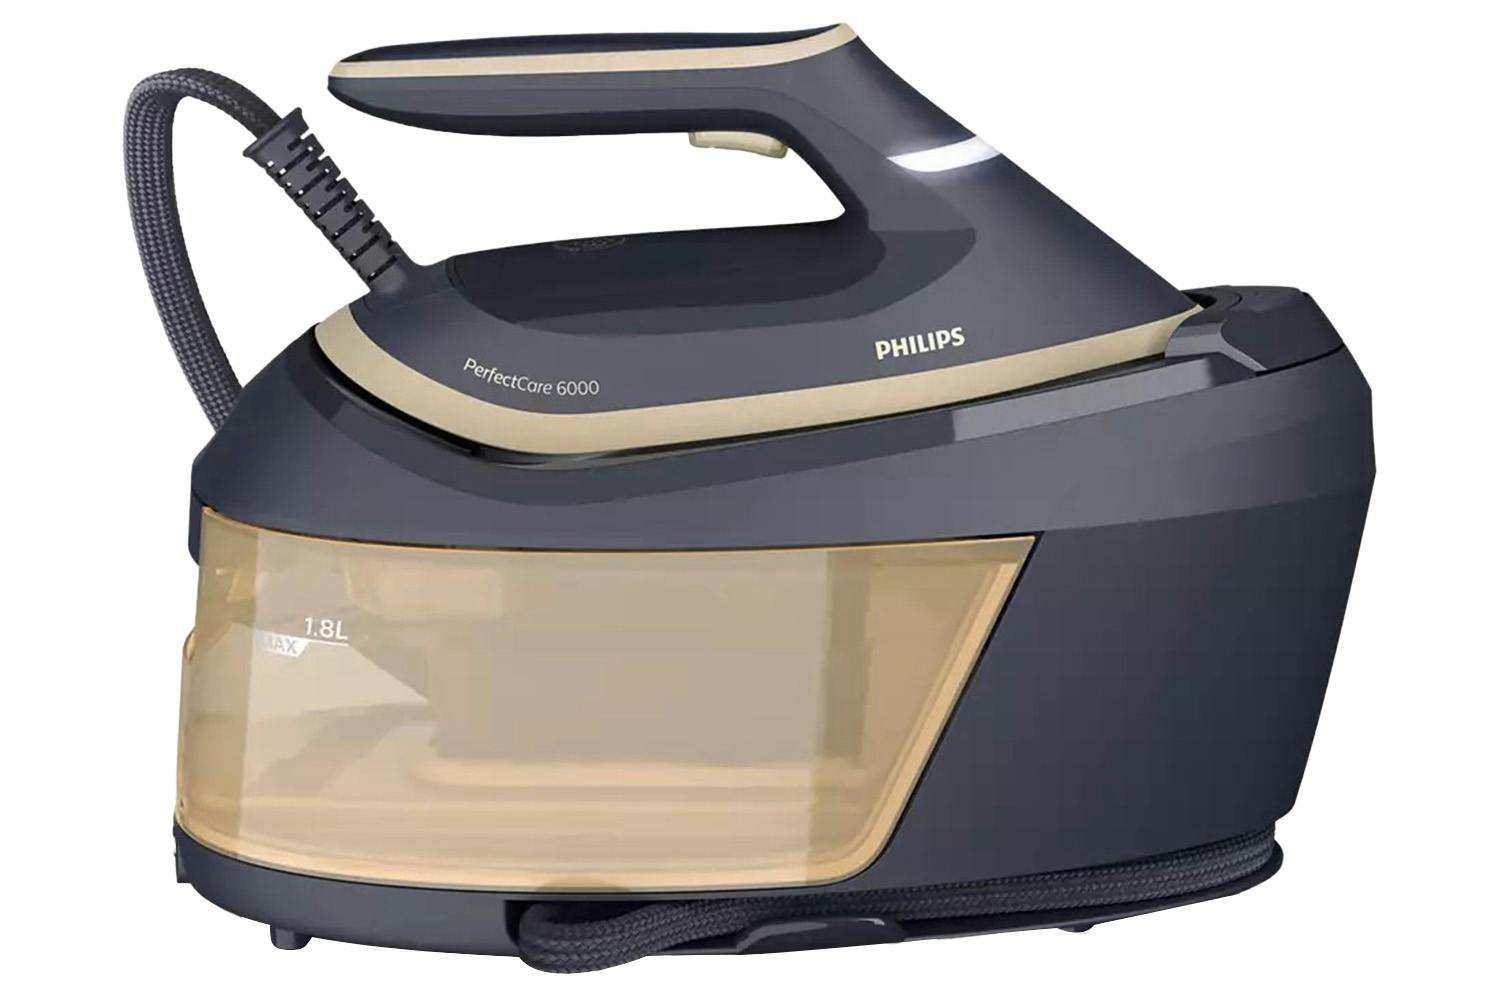 Philips 2400W Ultra Fast Extra Compact Steam Generator Iron | PSG6066/26